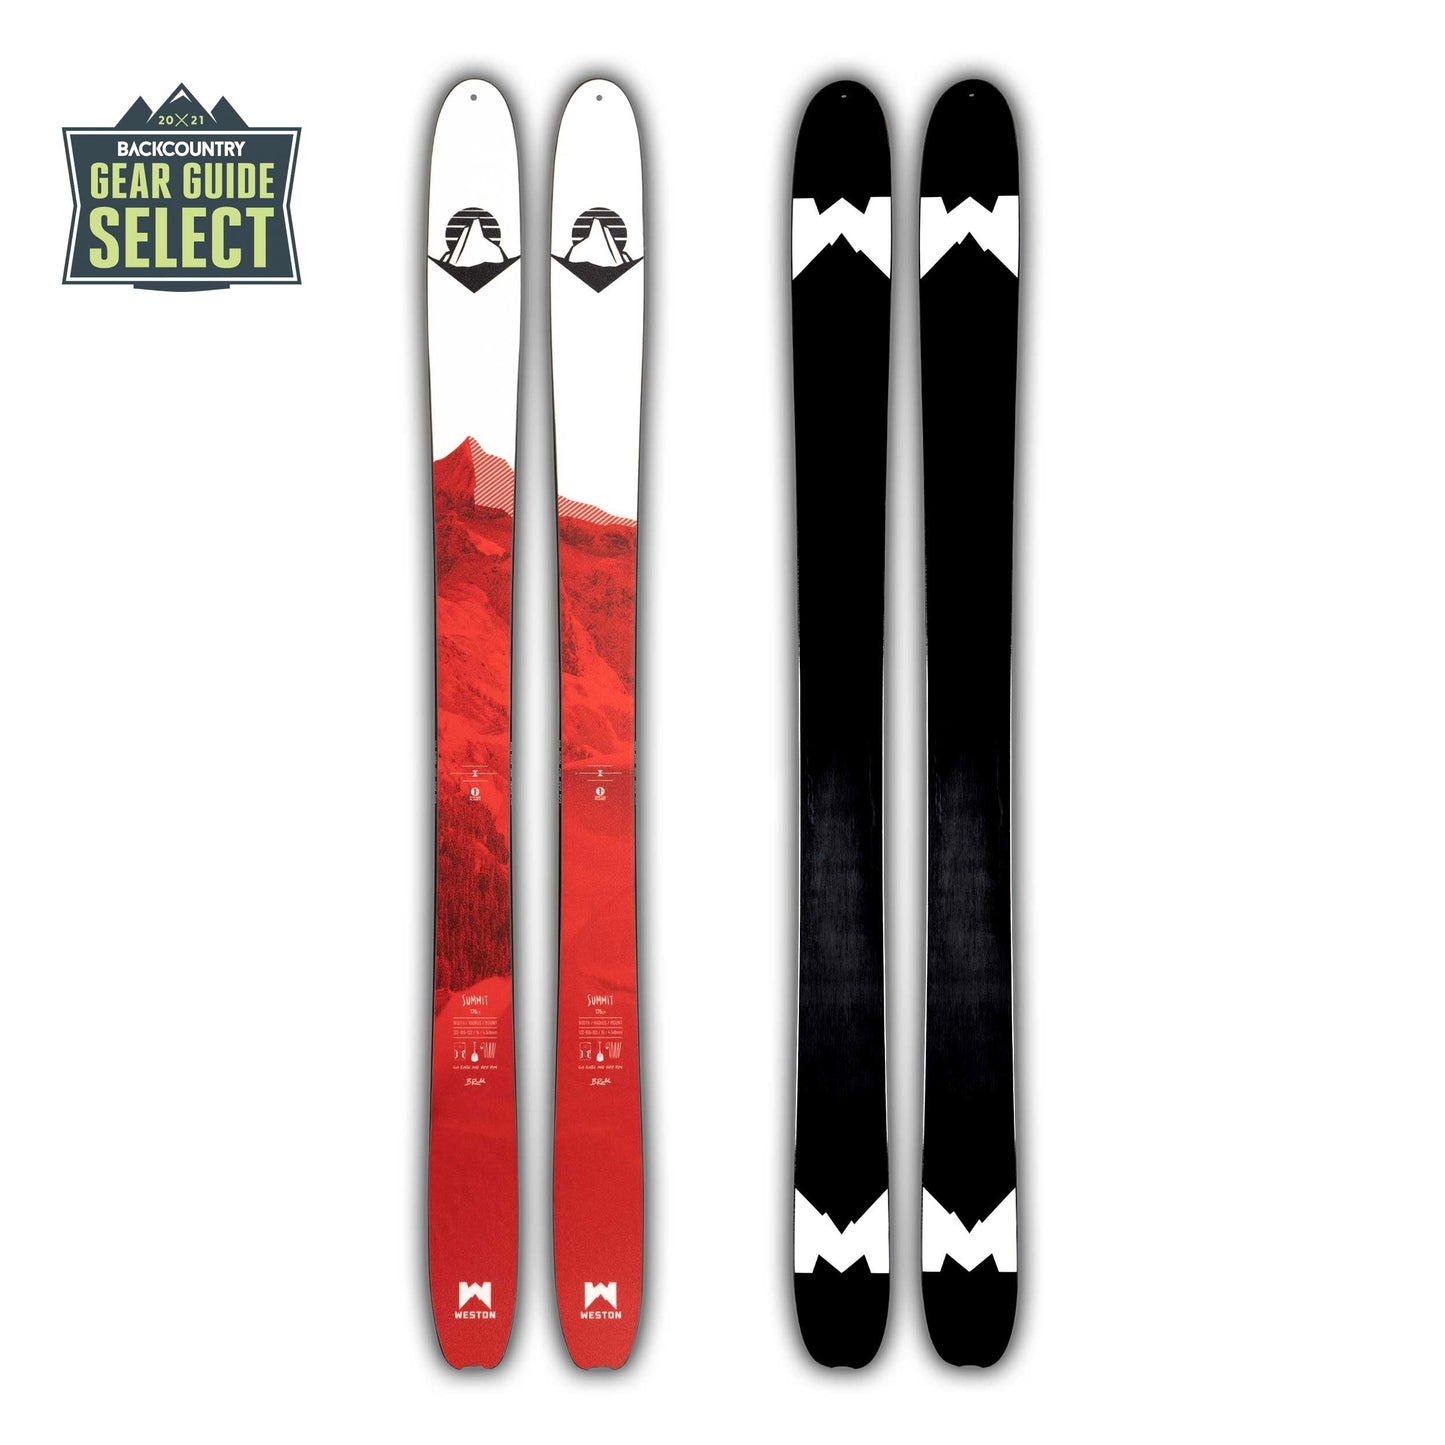 Summit Carbon Skis With Touring Bindings (Skins Included) Demo